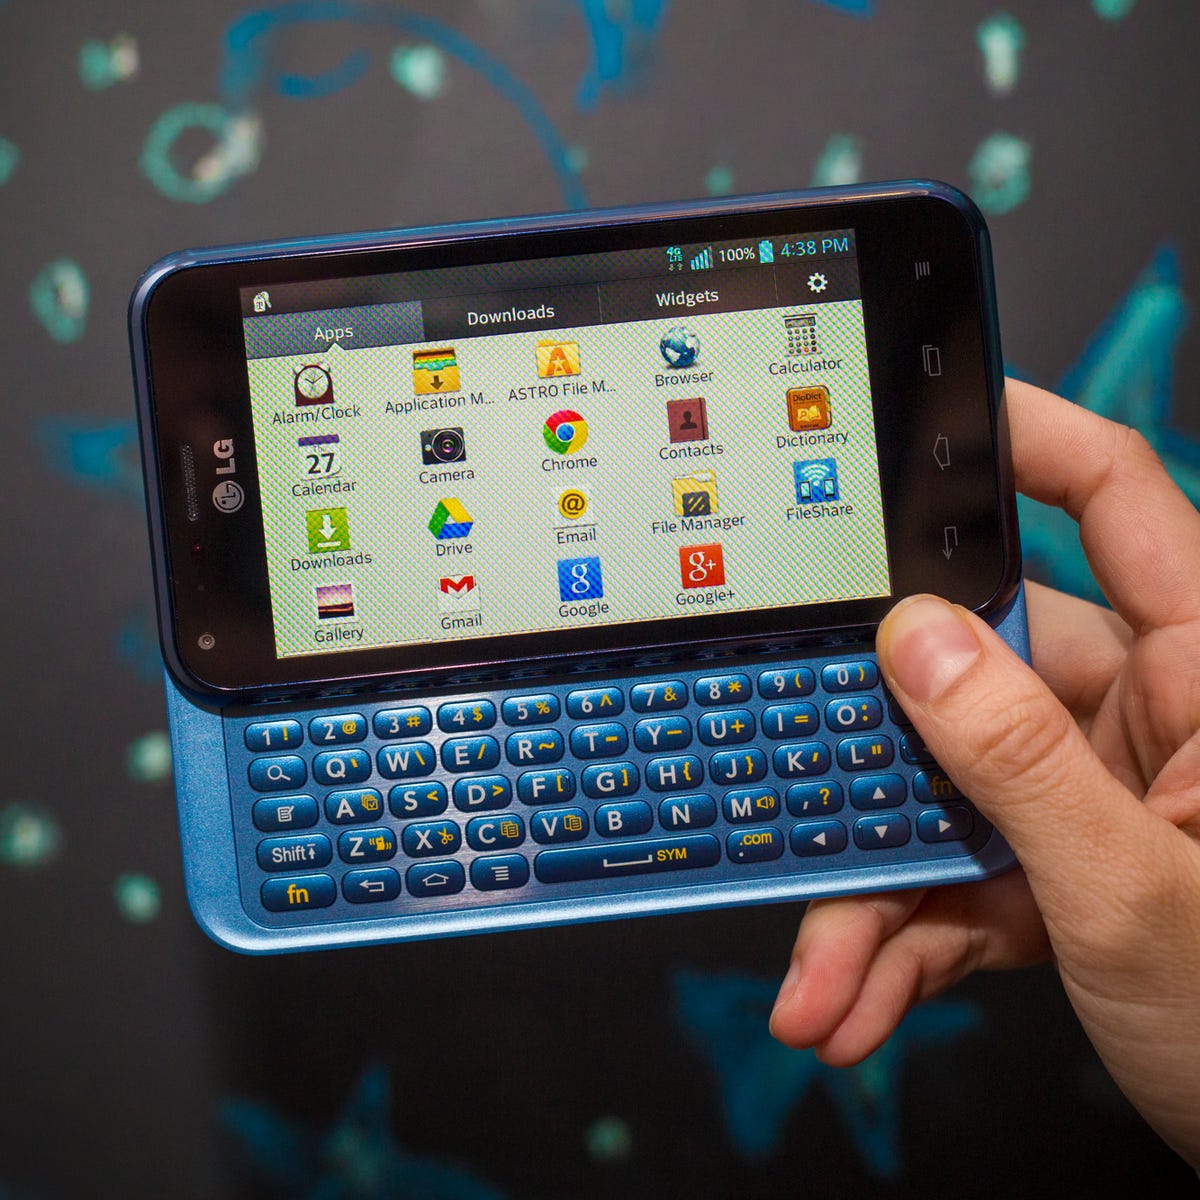 LG Optimus F3Q (T-Mobile) review: LG's comfy QWERTY a little laggy, but  reliable - CNET